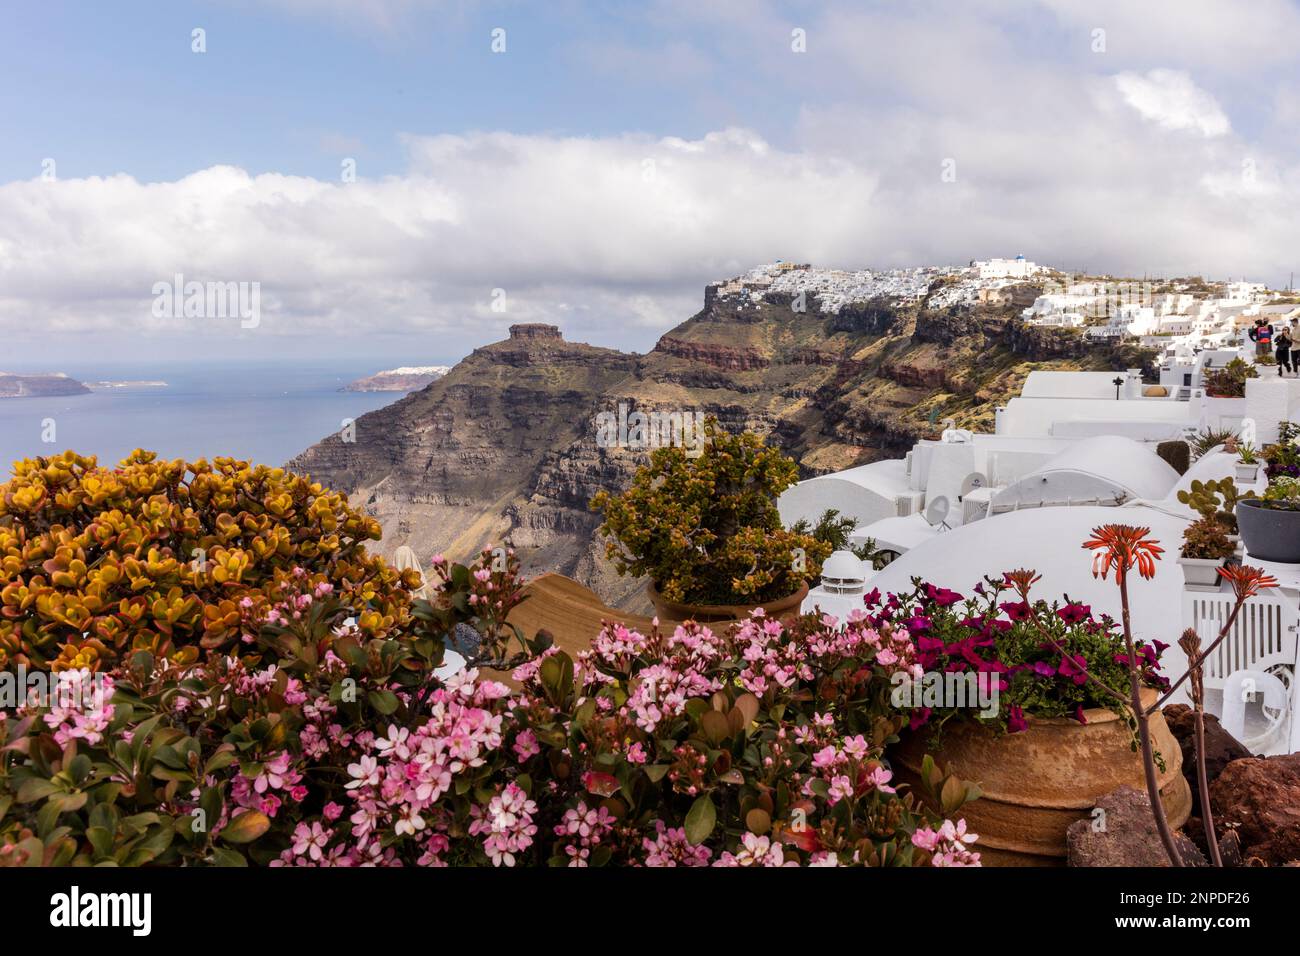 A view along the caldera towards Imerovigli with Spring wild flowers in bloom. Stock Photo